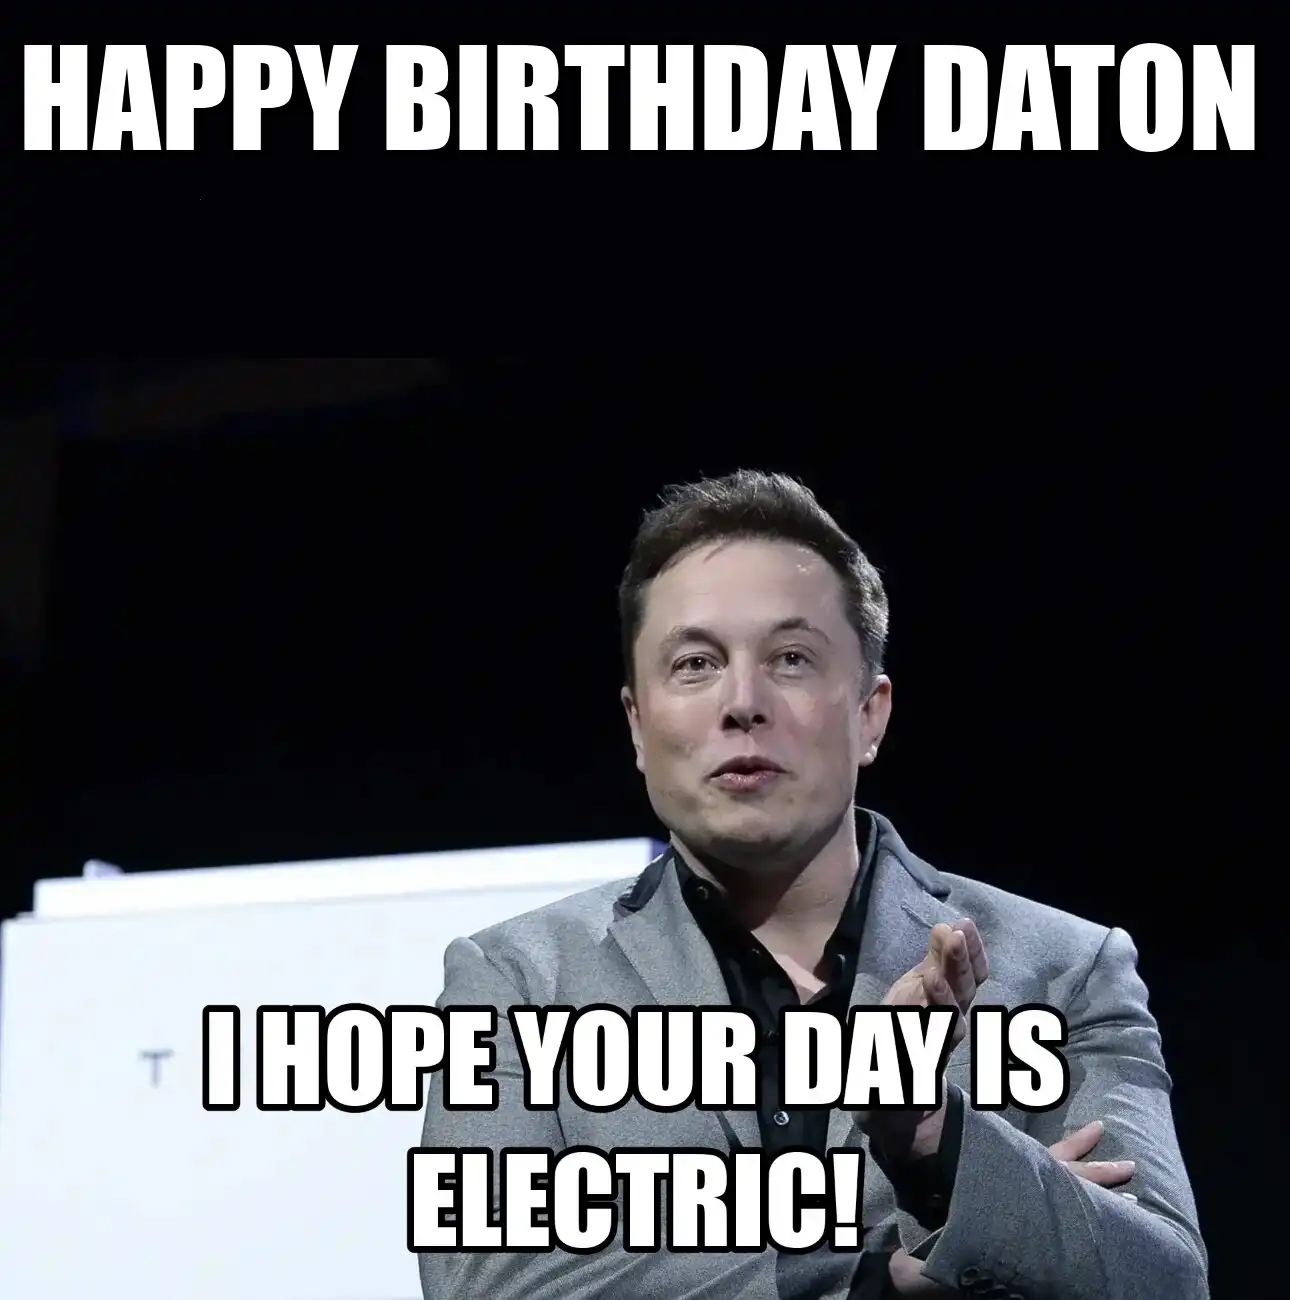 Happy Birthday Daton I Hope Your Day Is Electric Meme